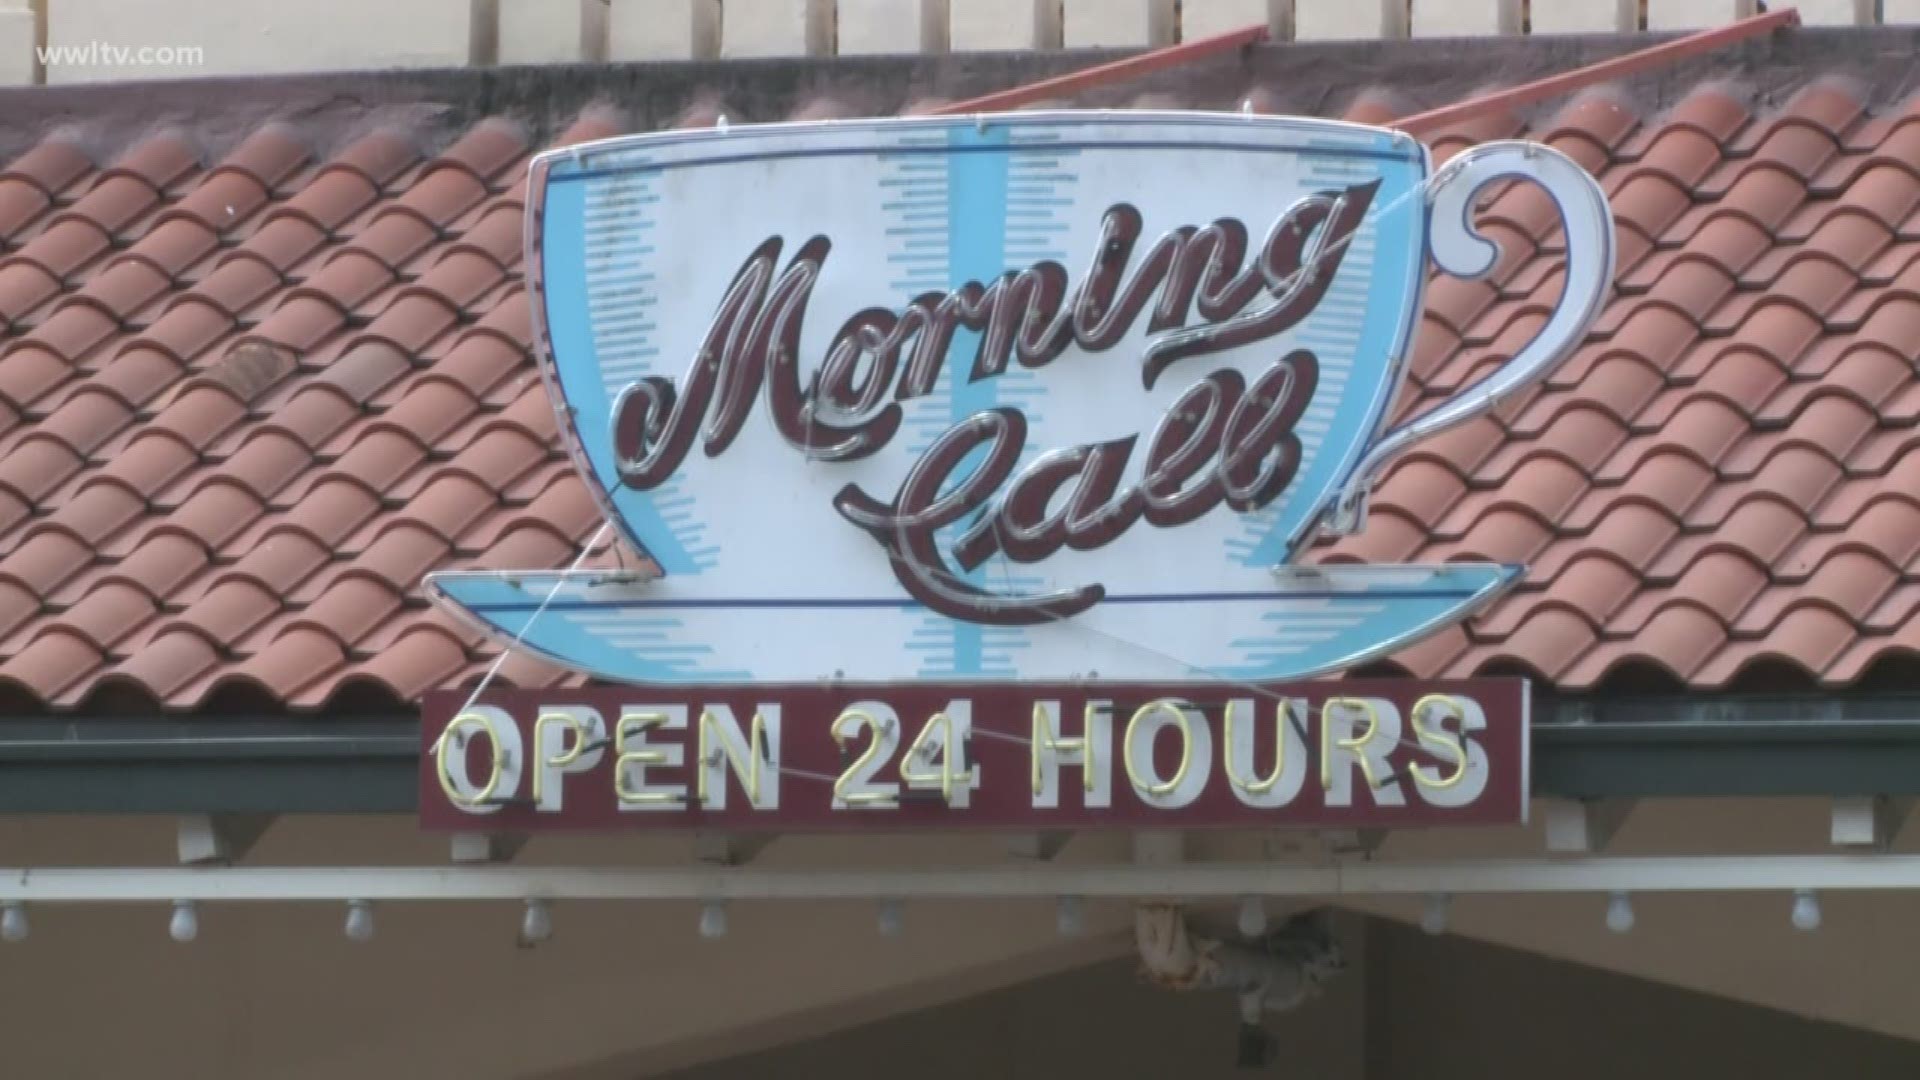 An Orleans Parish judge ruled that the contract it signed with Cafe du Monde was null.